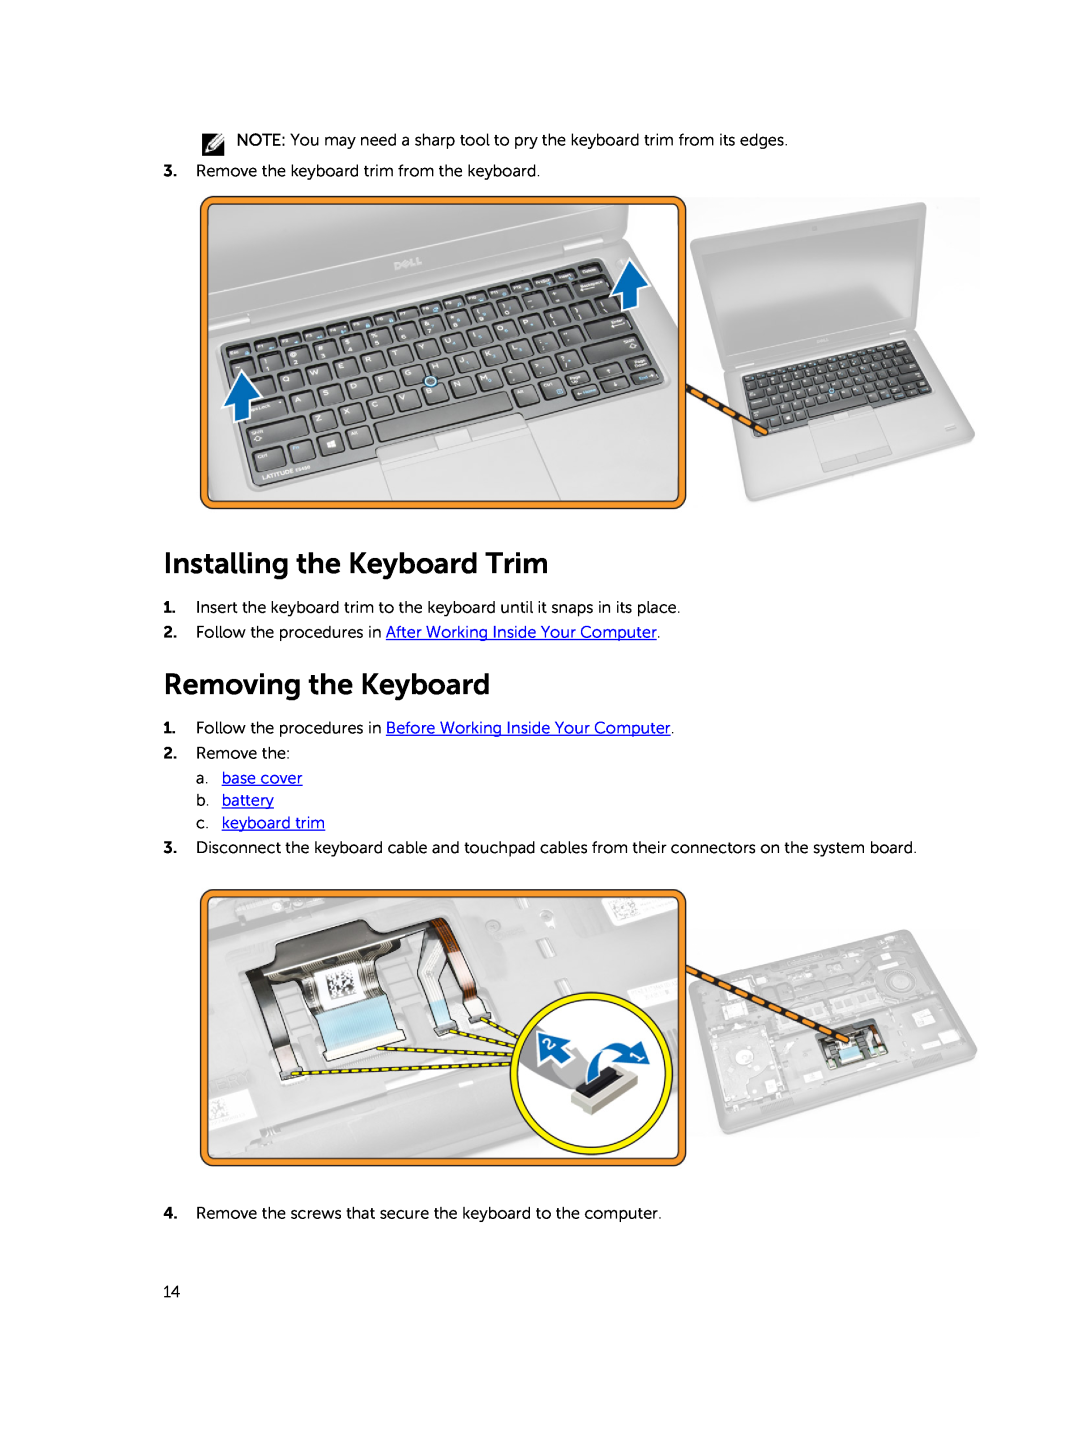 Dell E5450 owner manual Installing the Keyboard Trim, Removing the Keyboard 